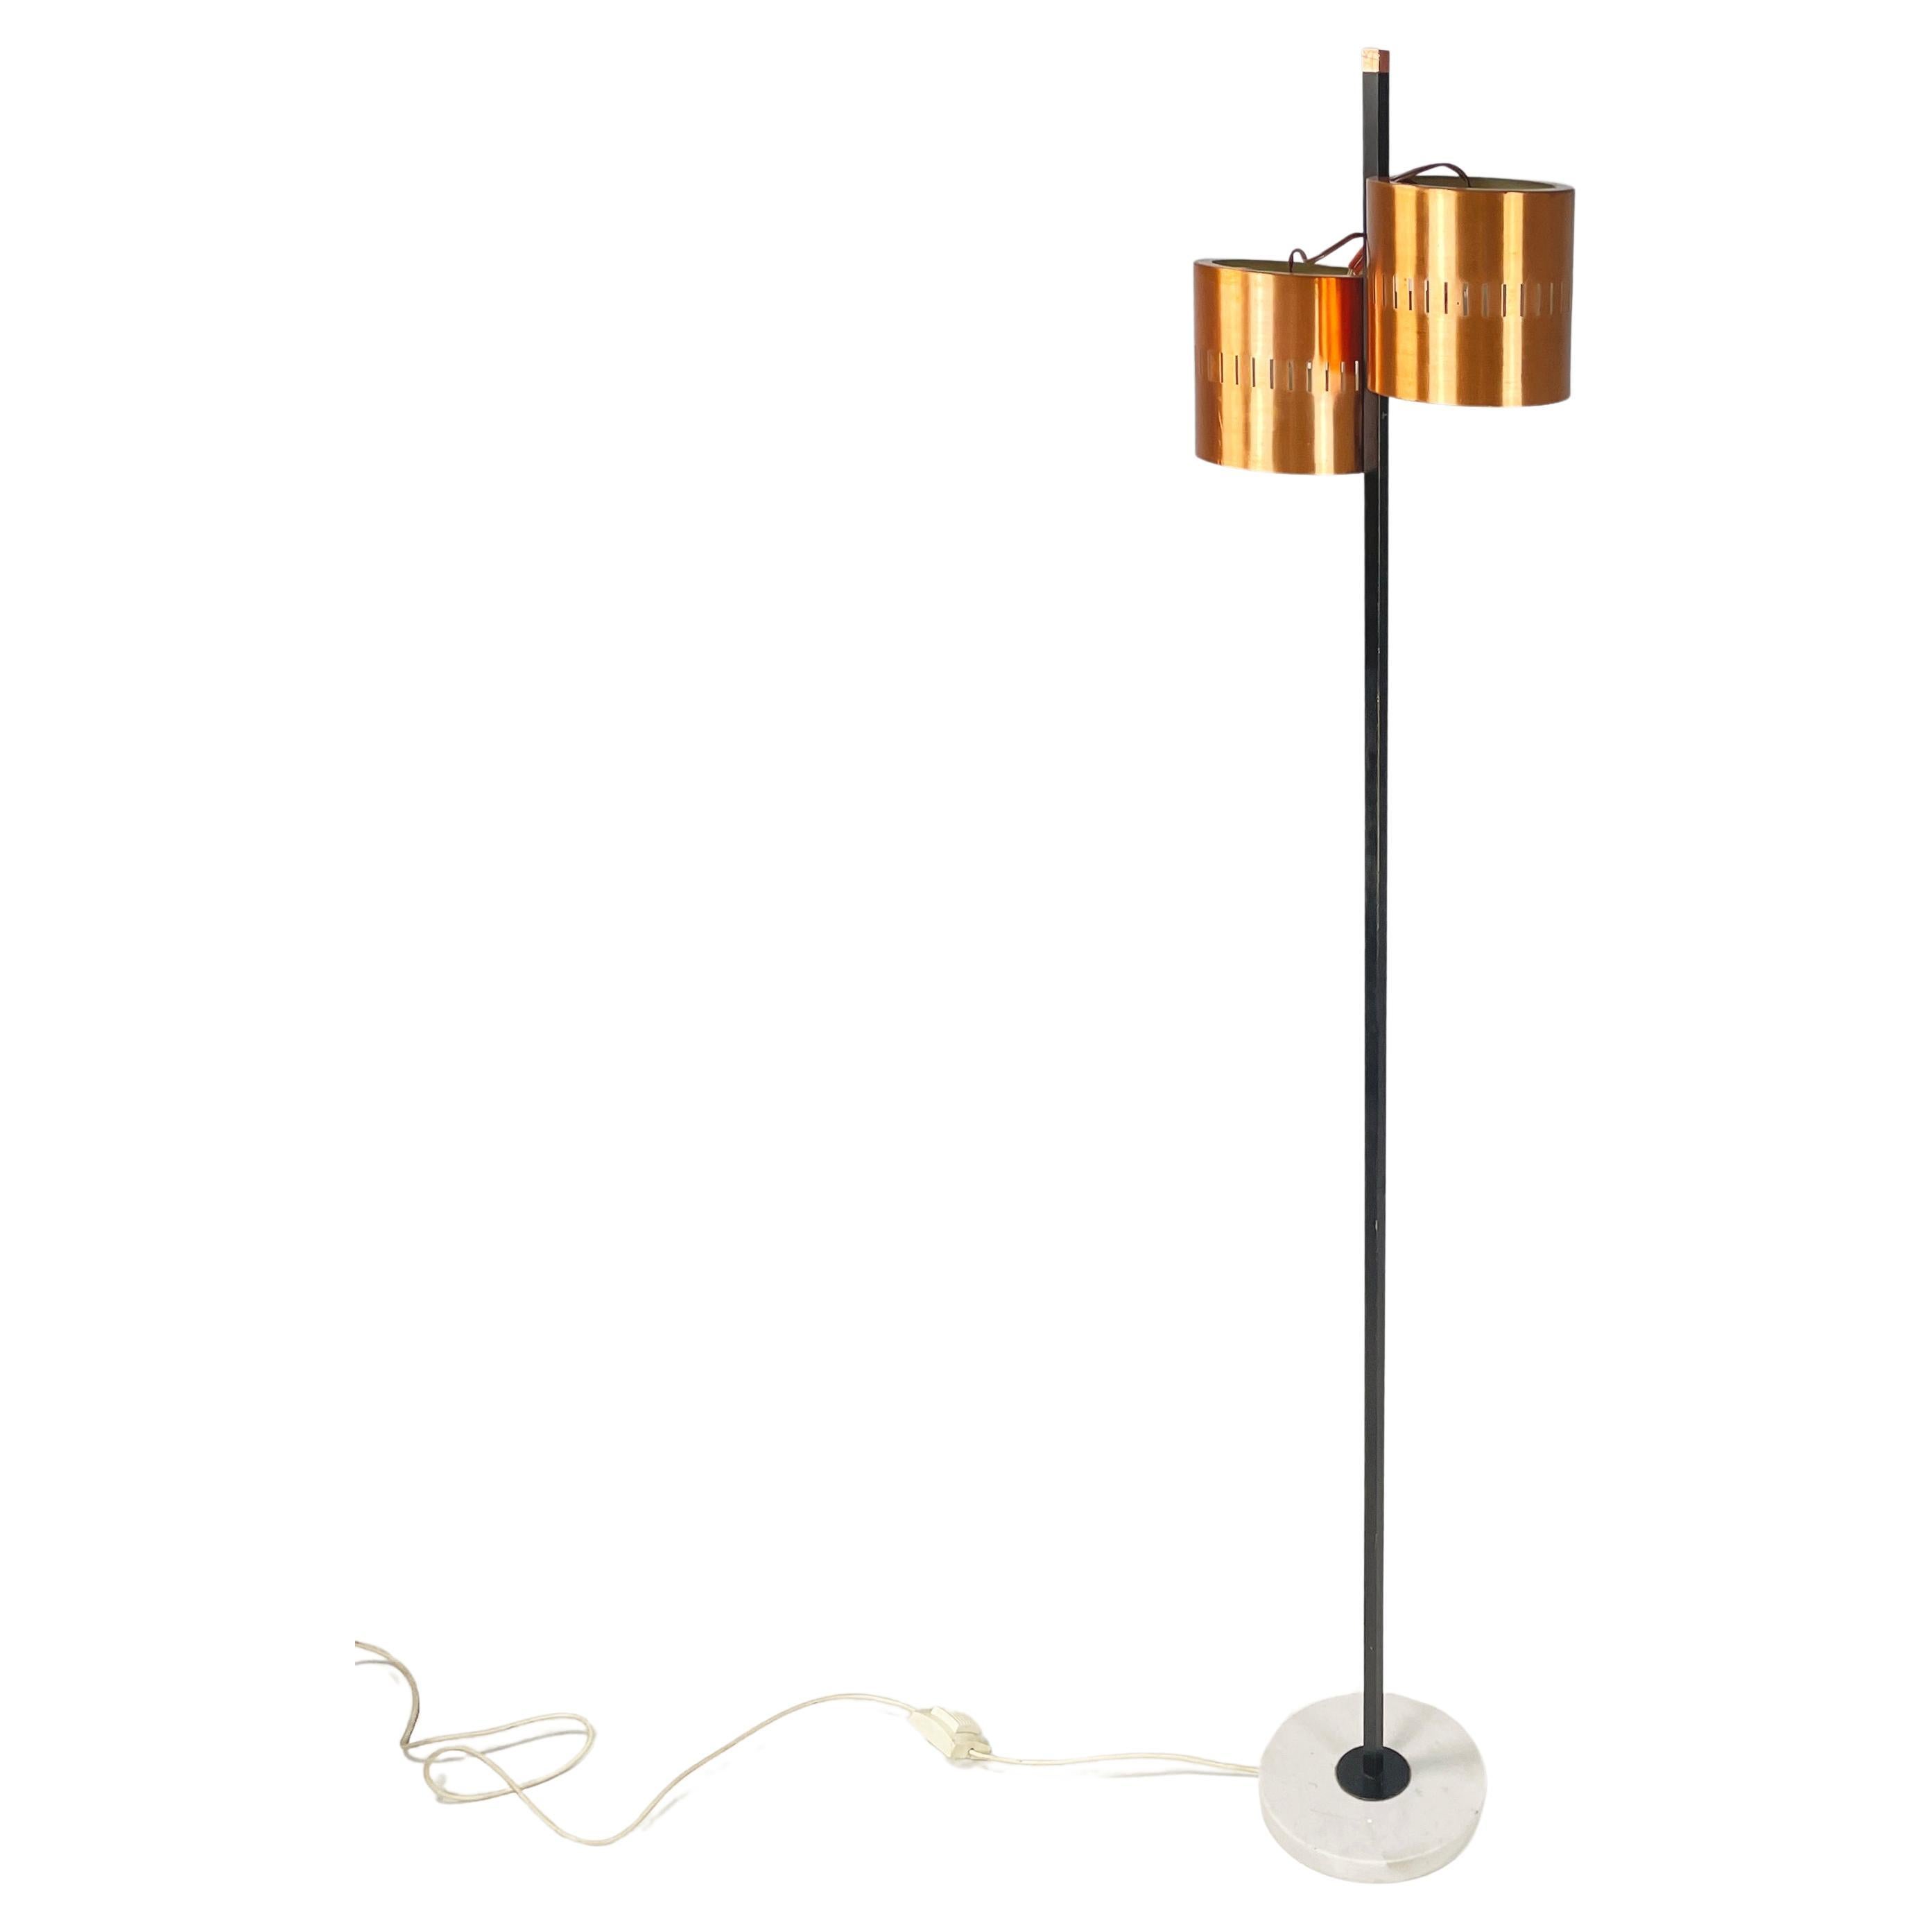 Italian mid-century modern Floor lamp in copper, black metal and marble, 1960s For Sale